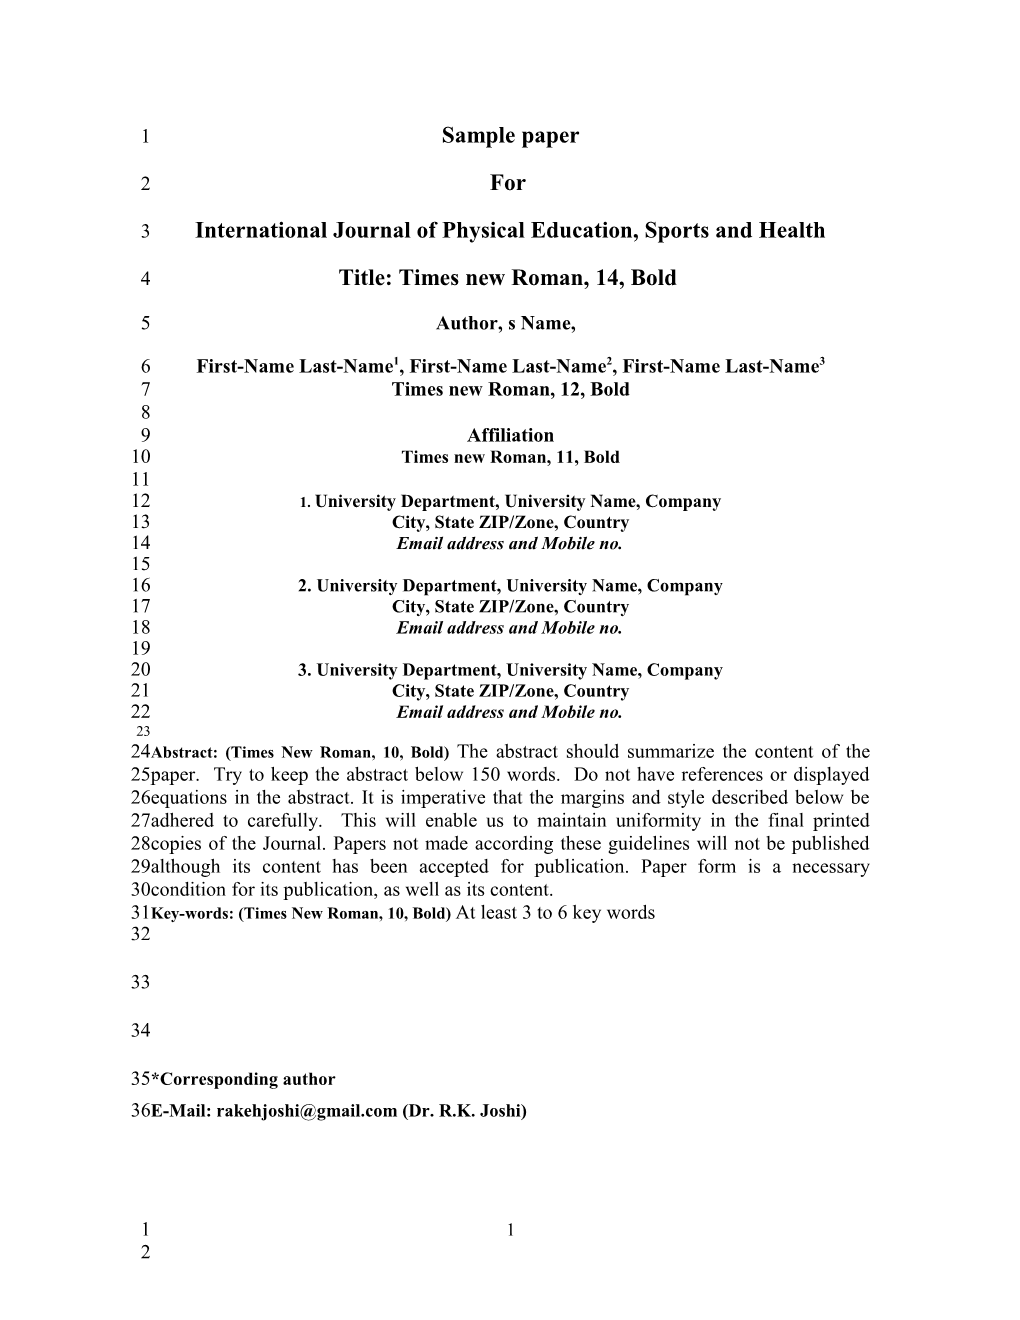 International Journal of Physical Education, Sports and Health